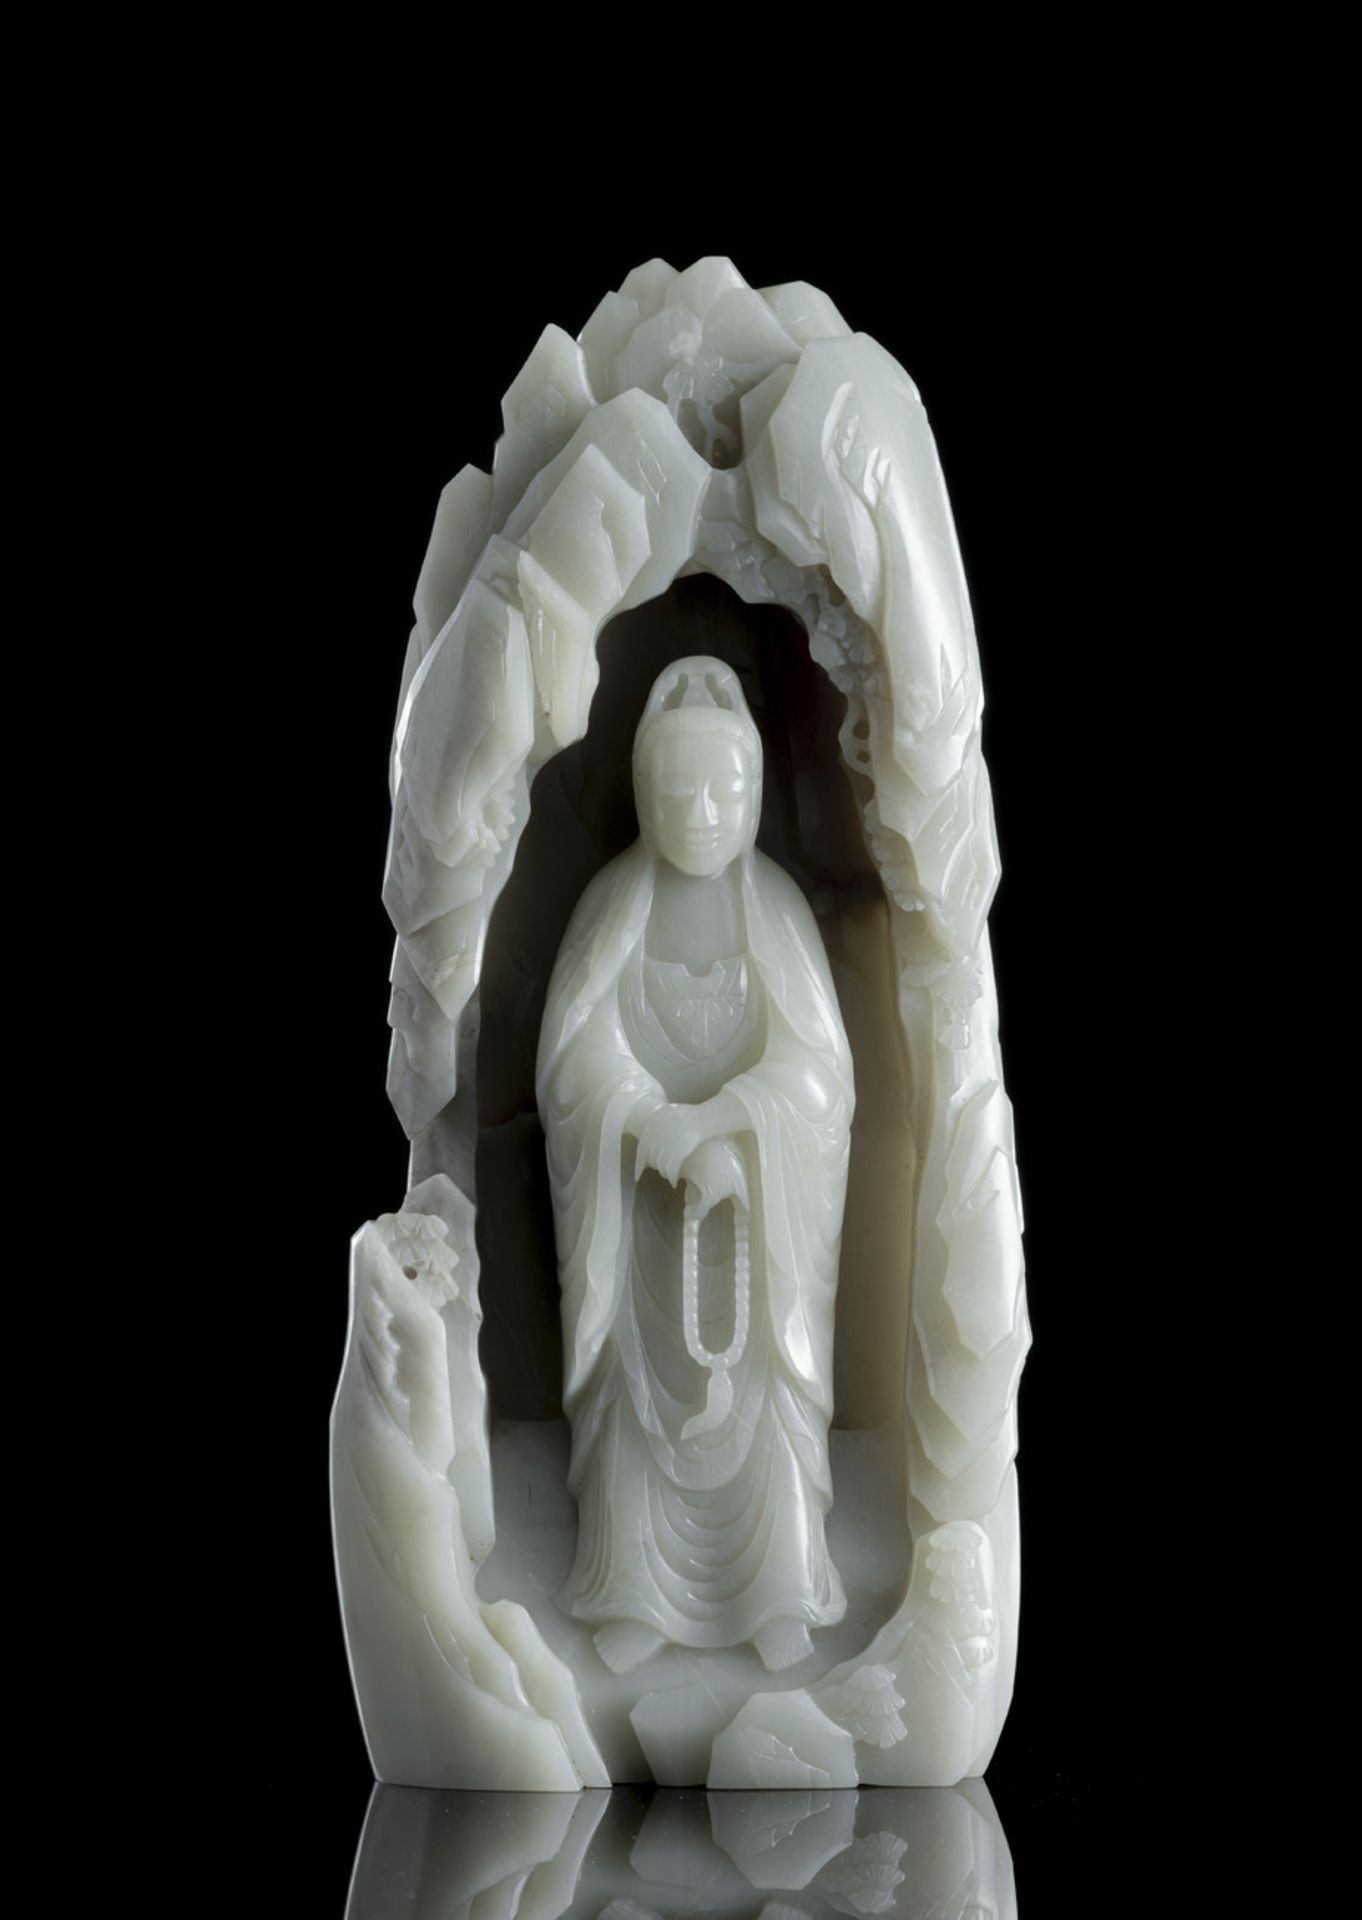 A RARE PALE CELADON JADE FIGURE OF GUANYIN IN A GROTTO